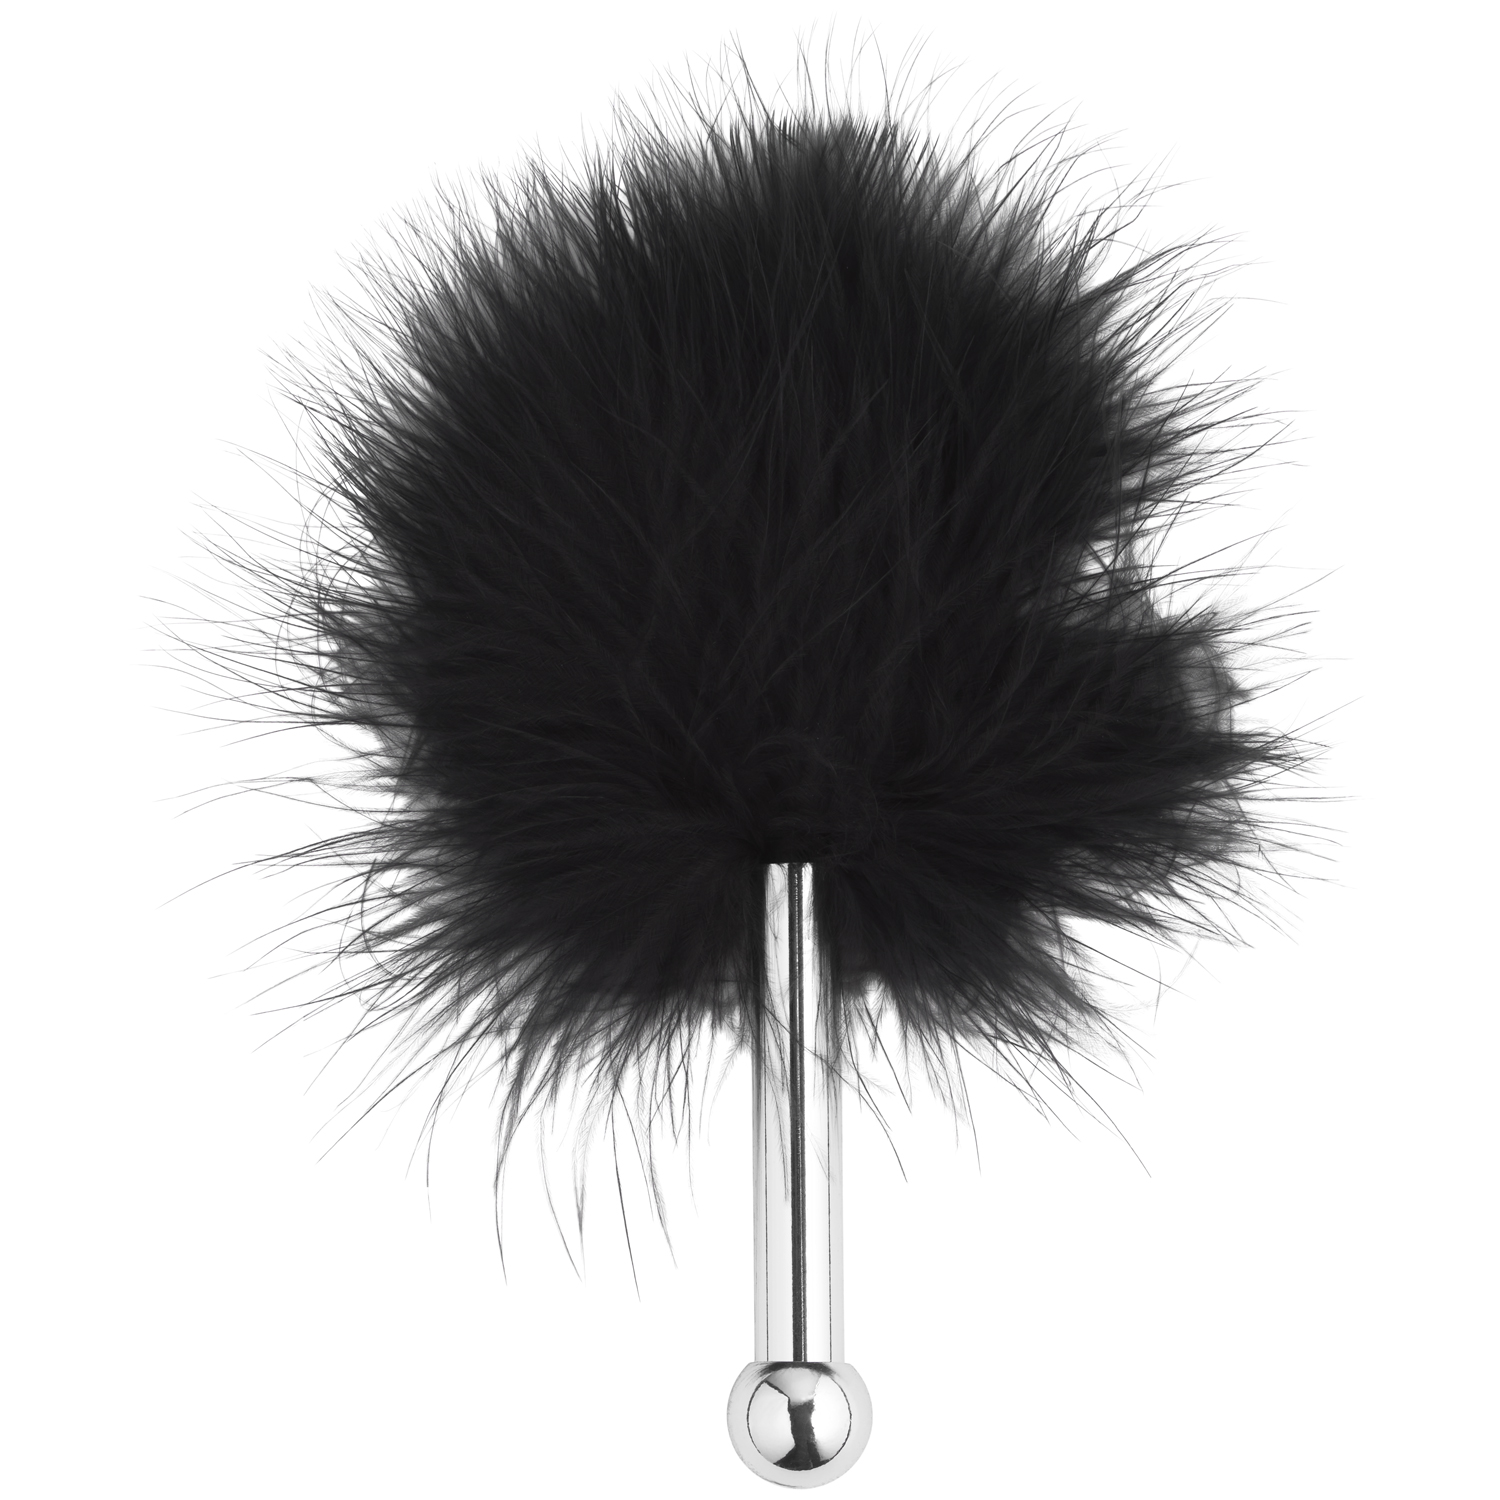 Sinful Tease Feather Silver Tickler      - Black